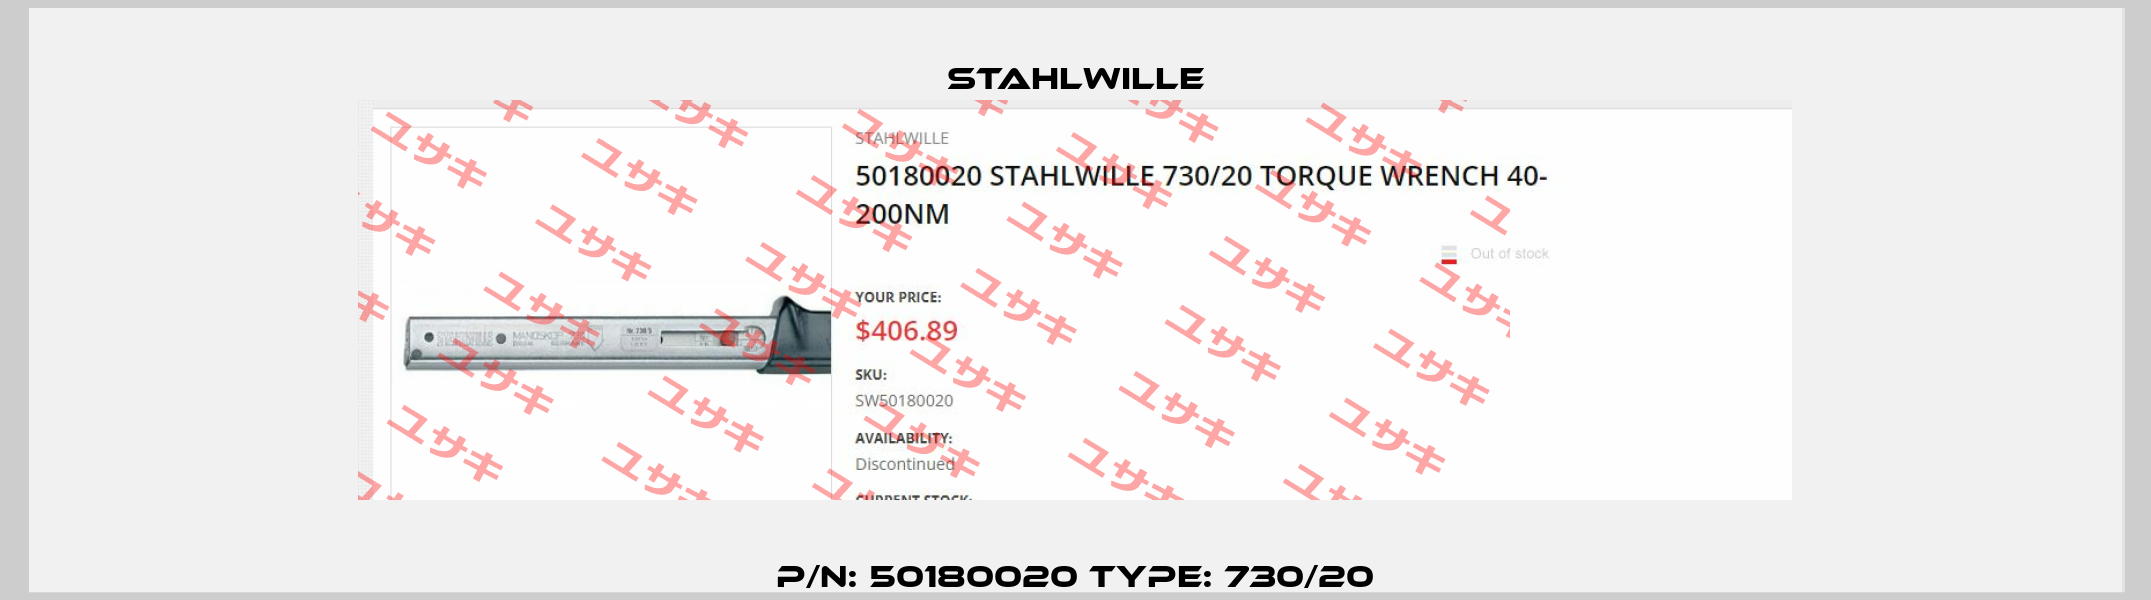 P/N: 50180020 Type: 730/20 Stahlwille